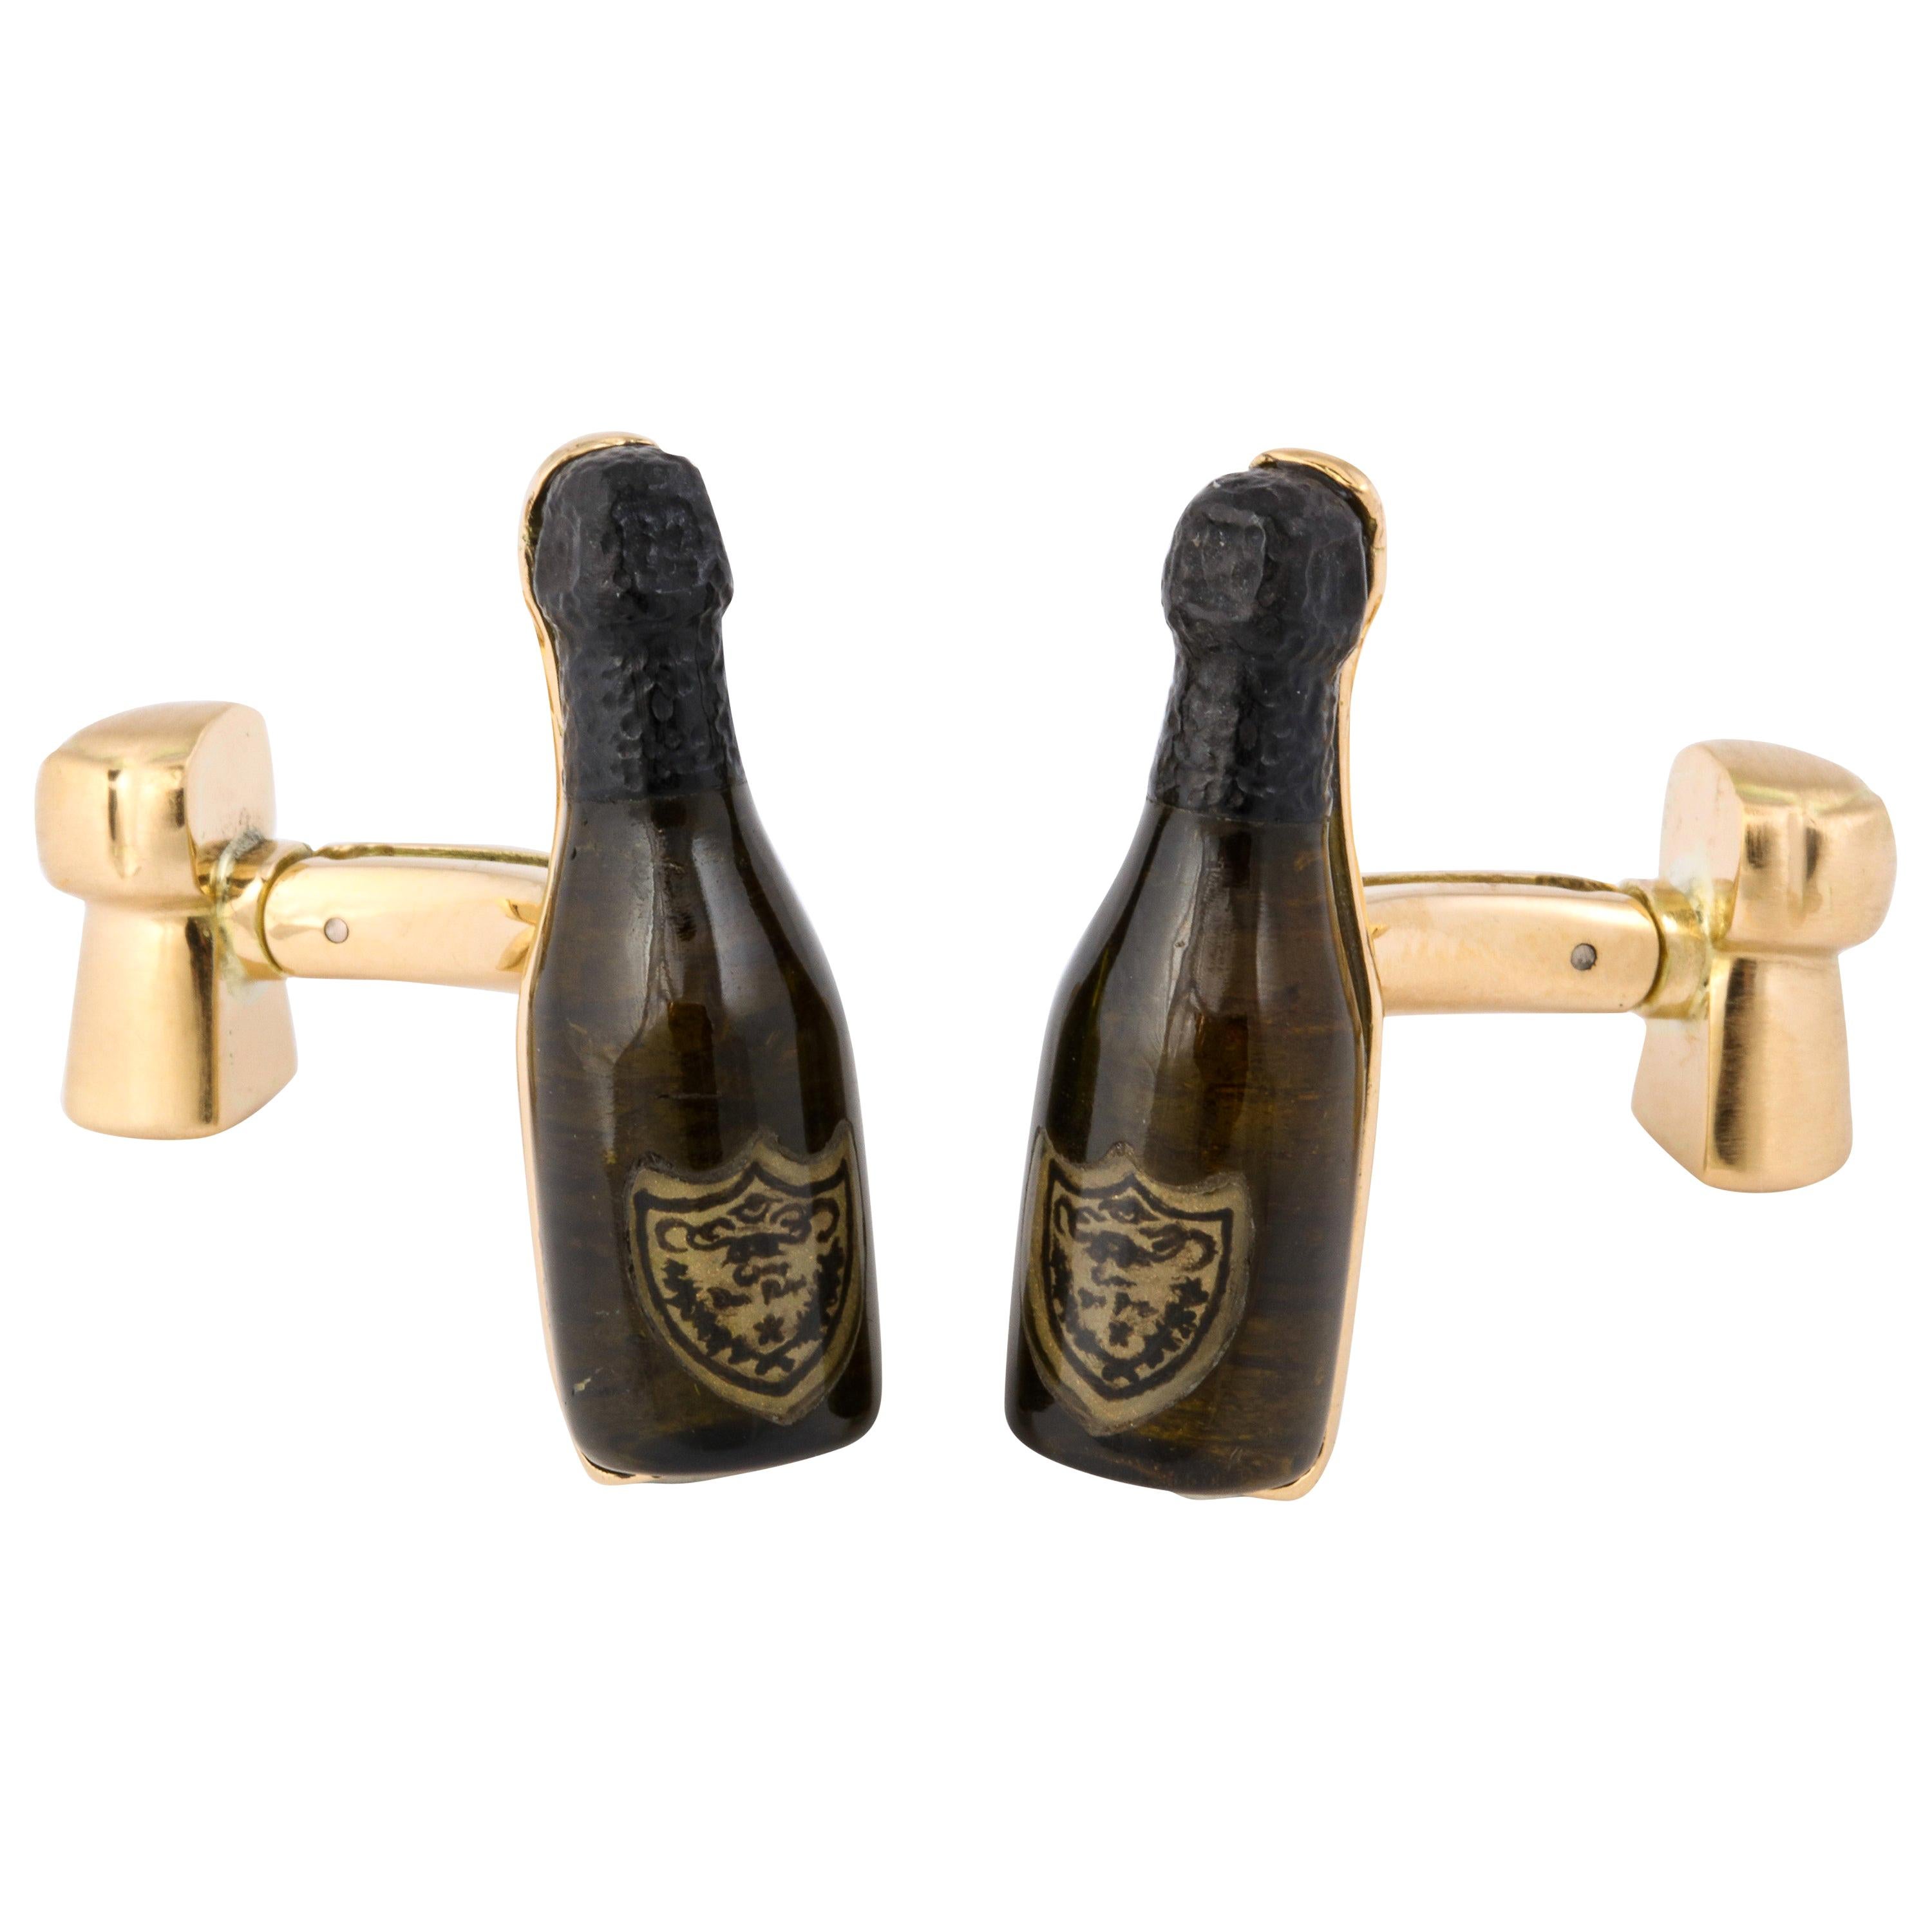 These are truly the most unique champagne bottle cufflinks around. The bottle is expertly shaped from green tourmaline by a master stone carver. The top of the bottle, traditionally covered in black foil, is carved from black tourmaline. Finally,